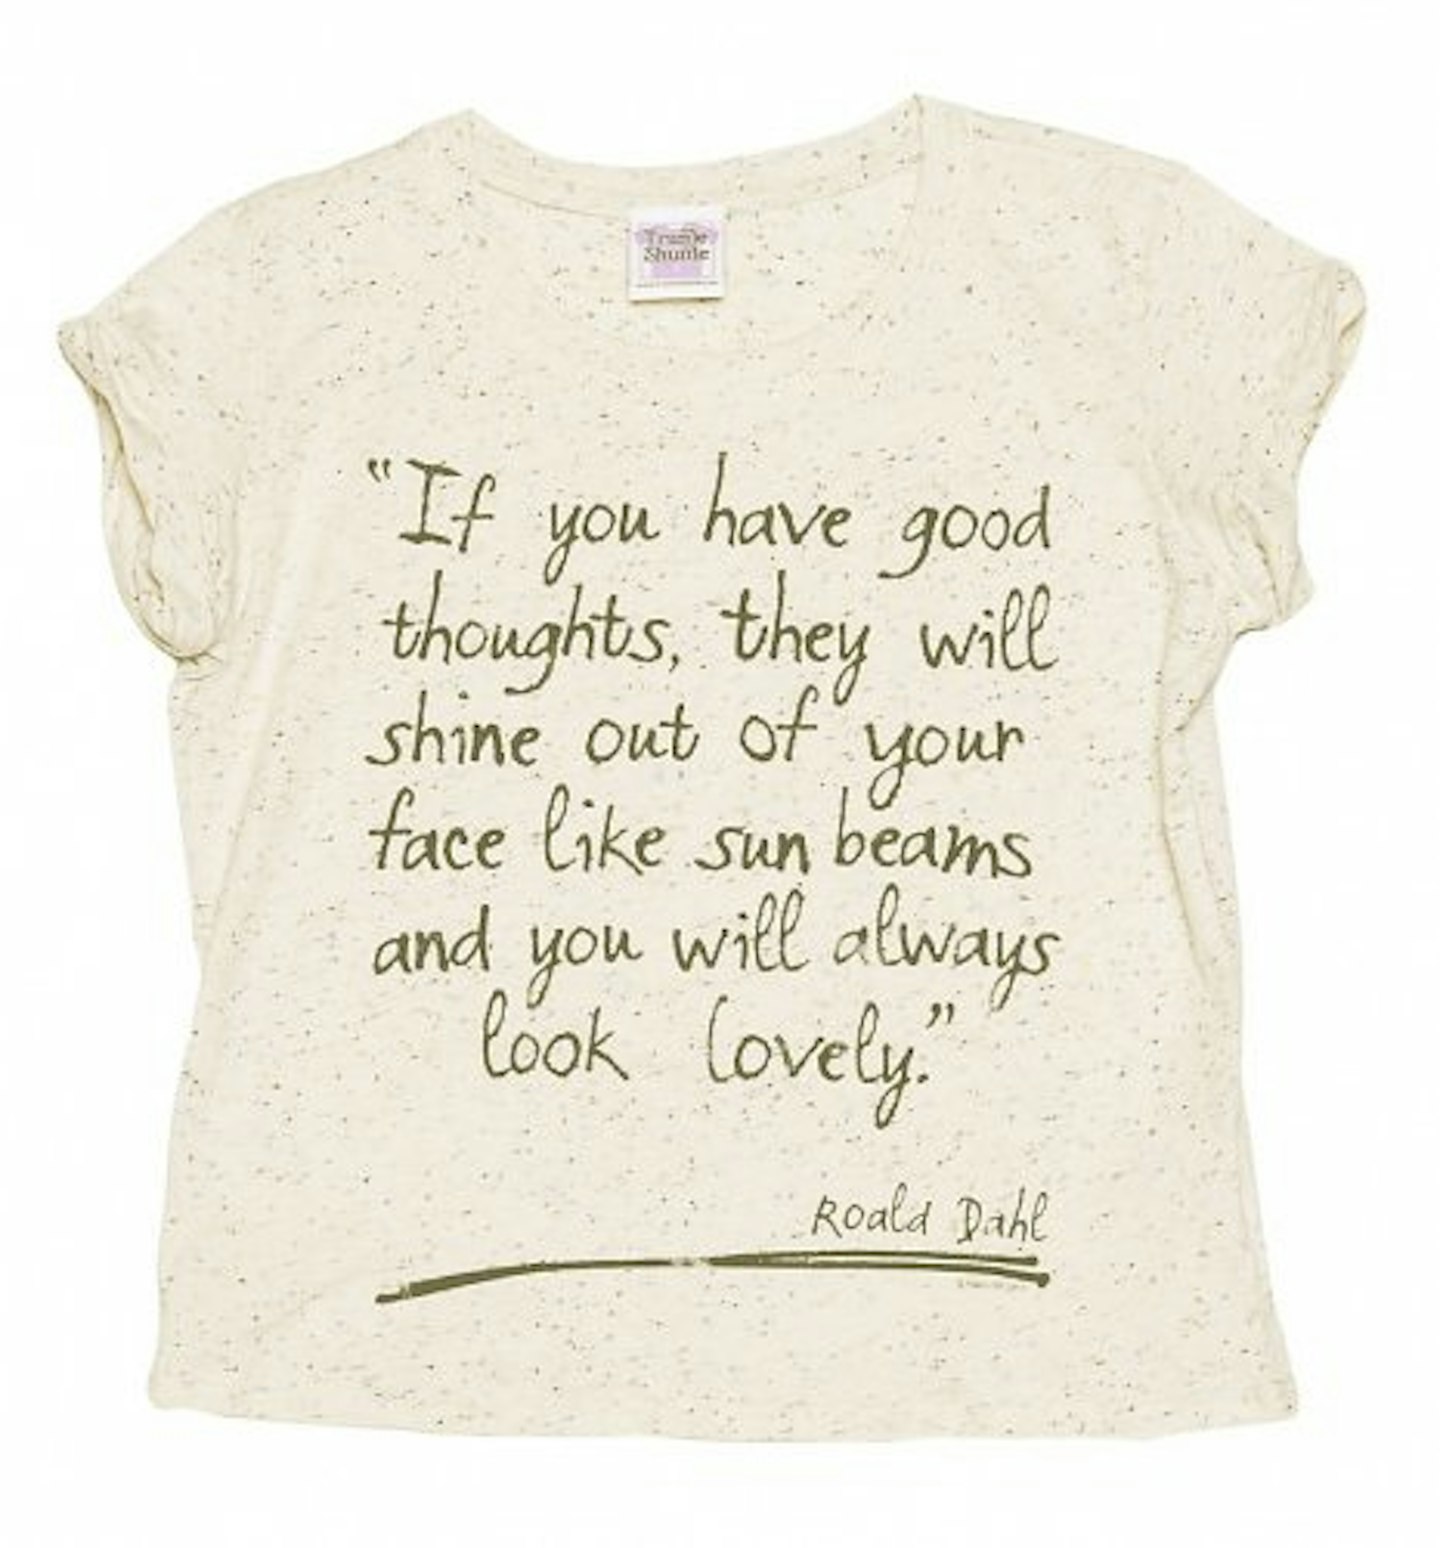 Roald Dahl inspired clothes